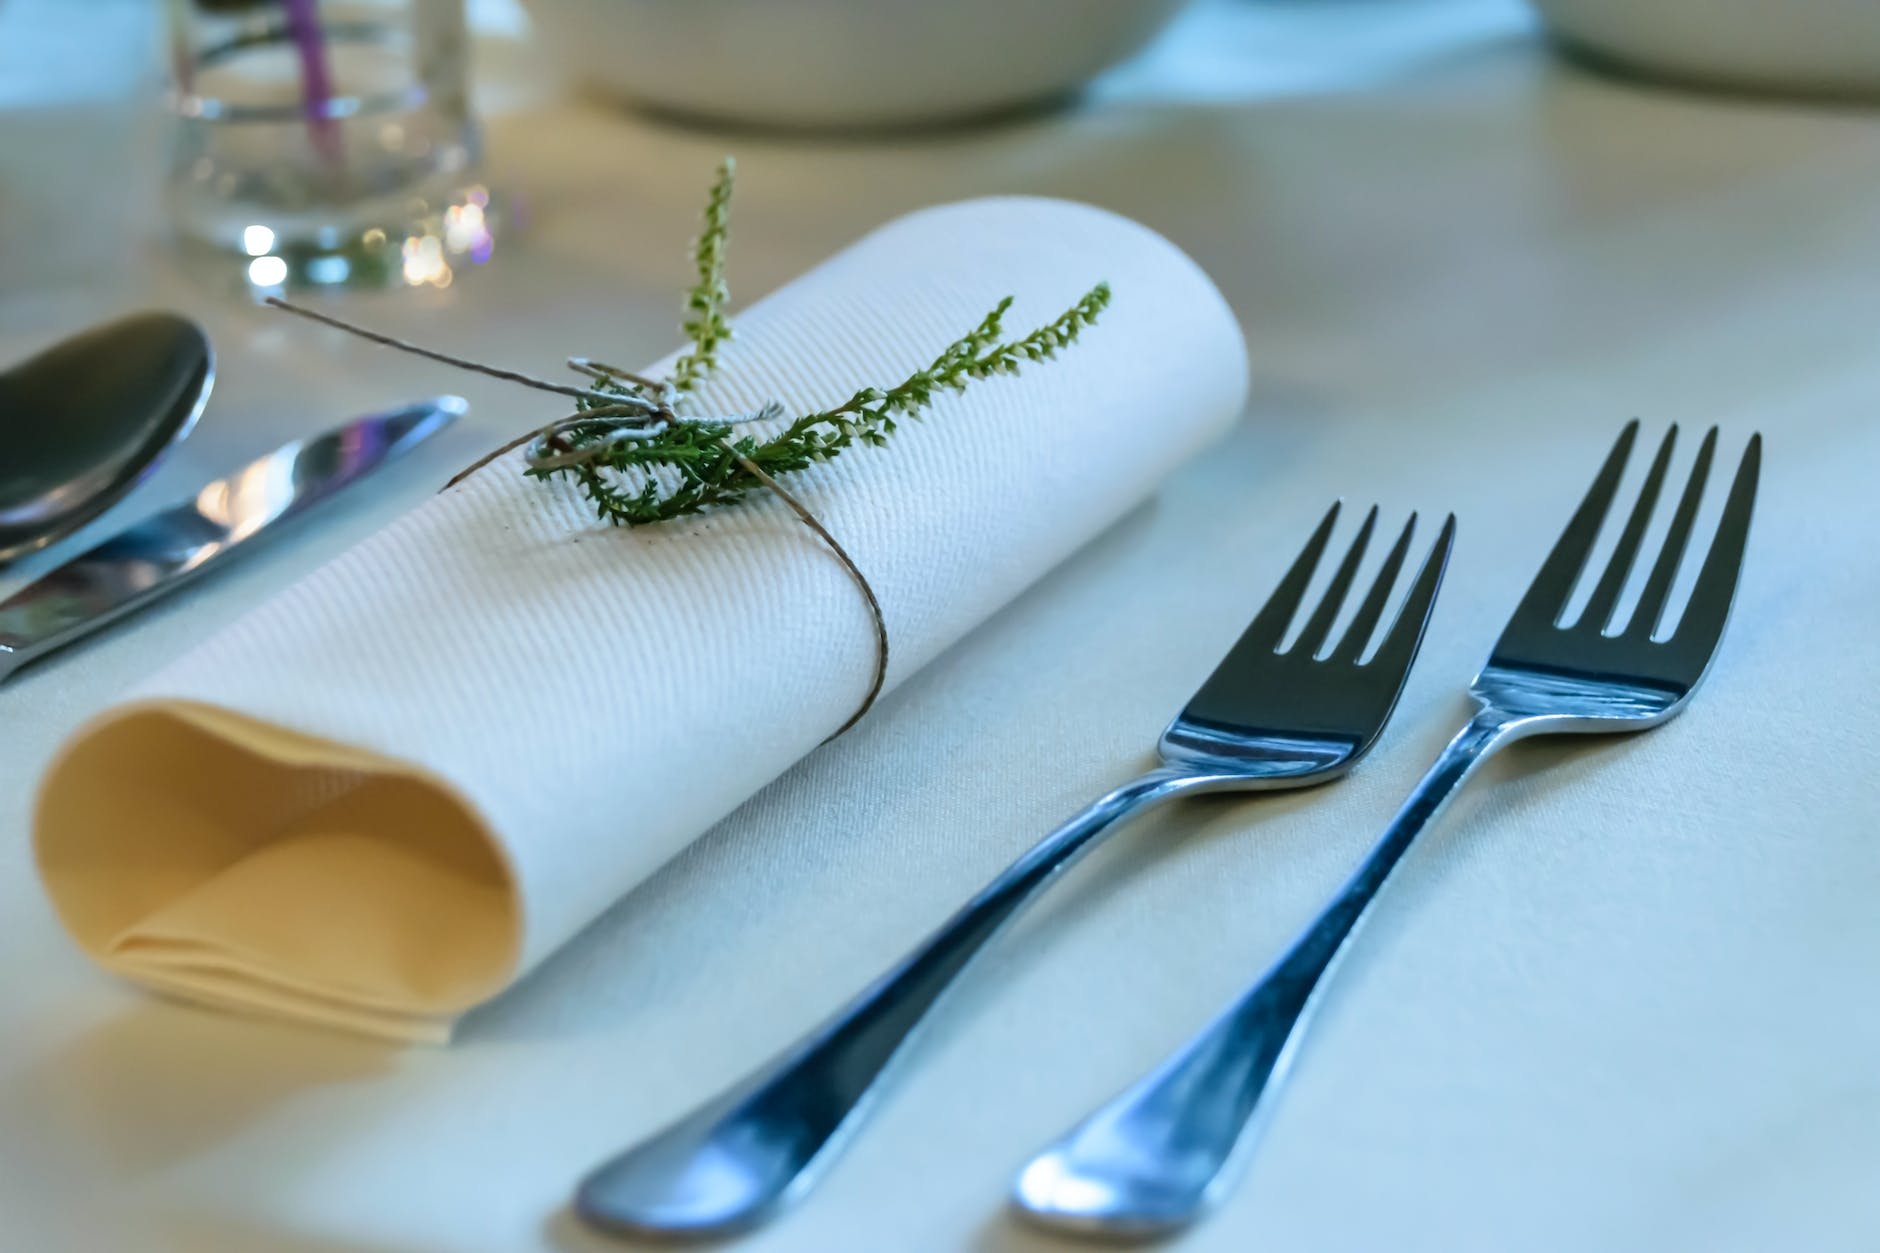 stainless steel fork beside rolled paper towel with parsley on top